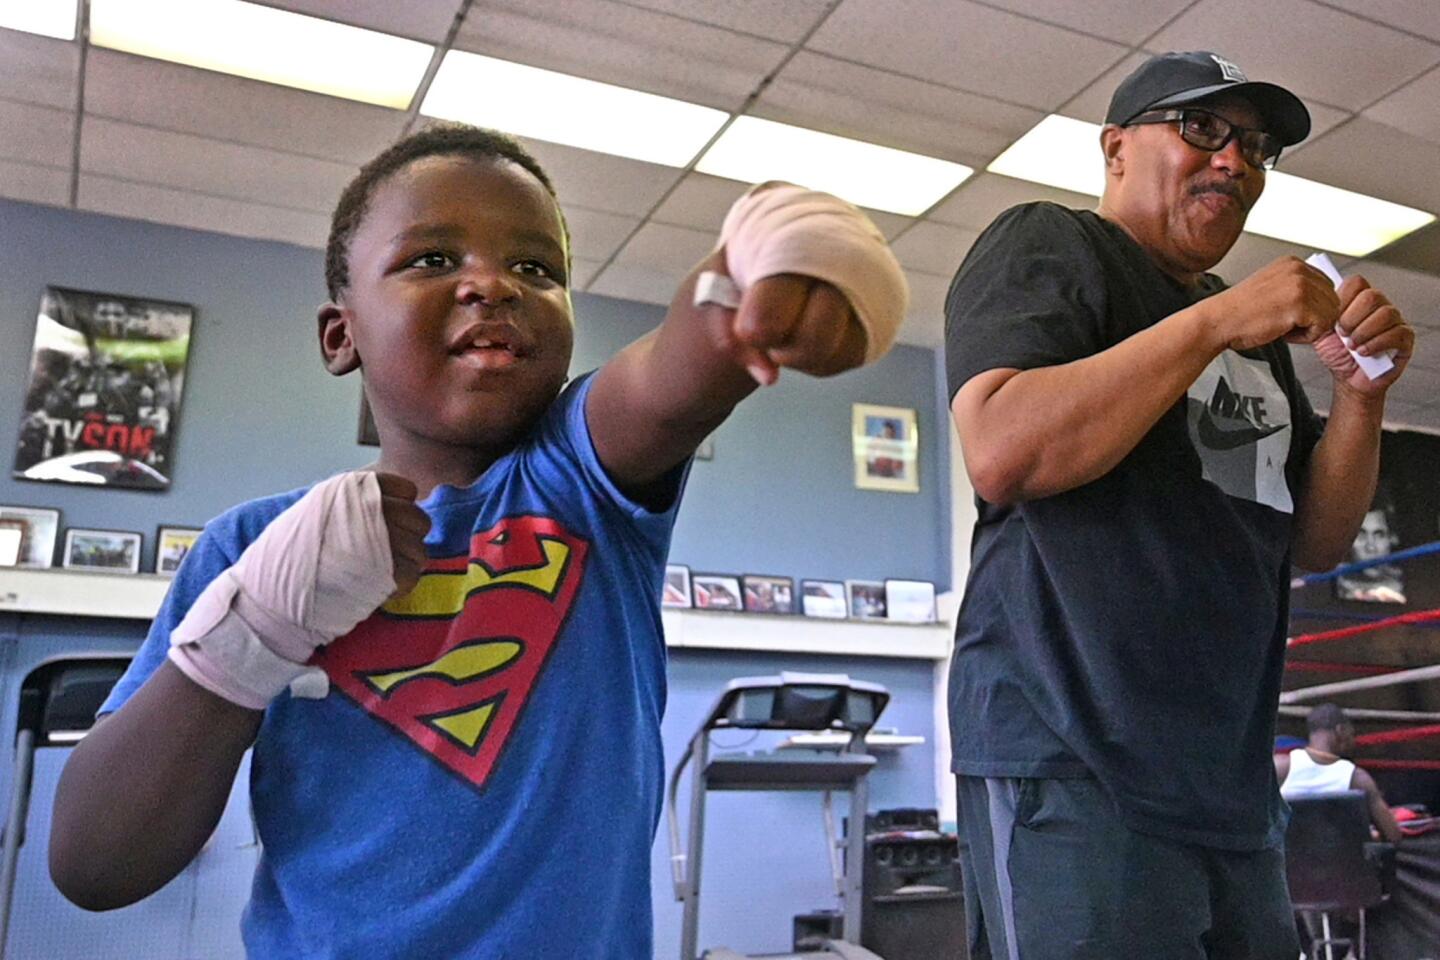 Carter Hopkins, 6, practices his moves facing a mirror, with encouragement from Michael Robinson, co-owner with his wife Germaine Robinson of the Uppercut Boxing Gym. Hopkins is enrolled in a summer camp program at the gym, which relocated to 4408 Park Heights Avenue from Wabash Avenue last August. (all children in camp have permission from parents to be photographed.)